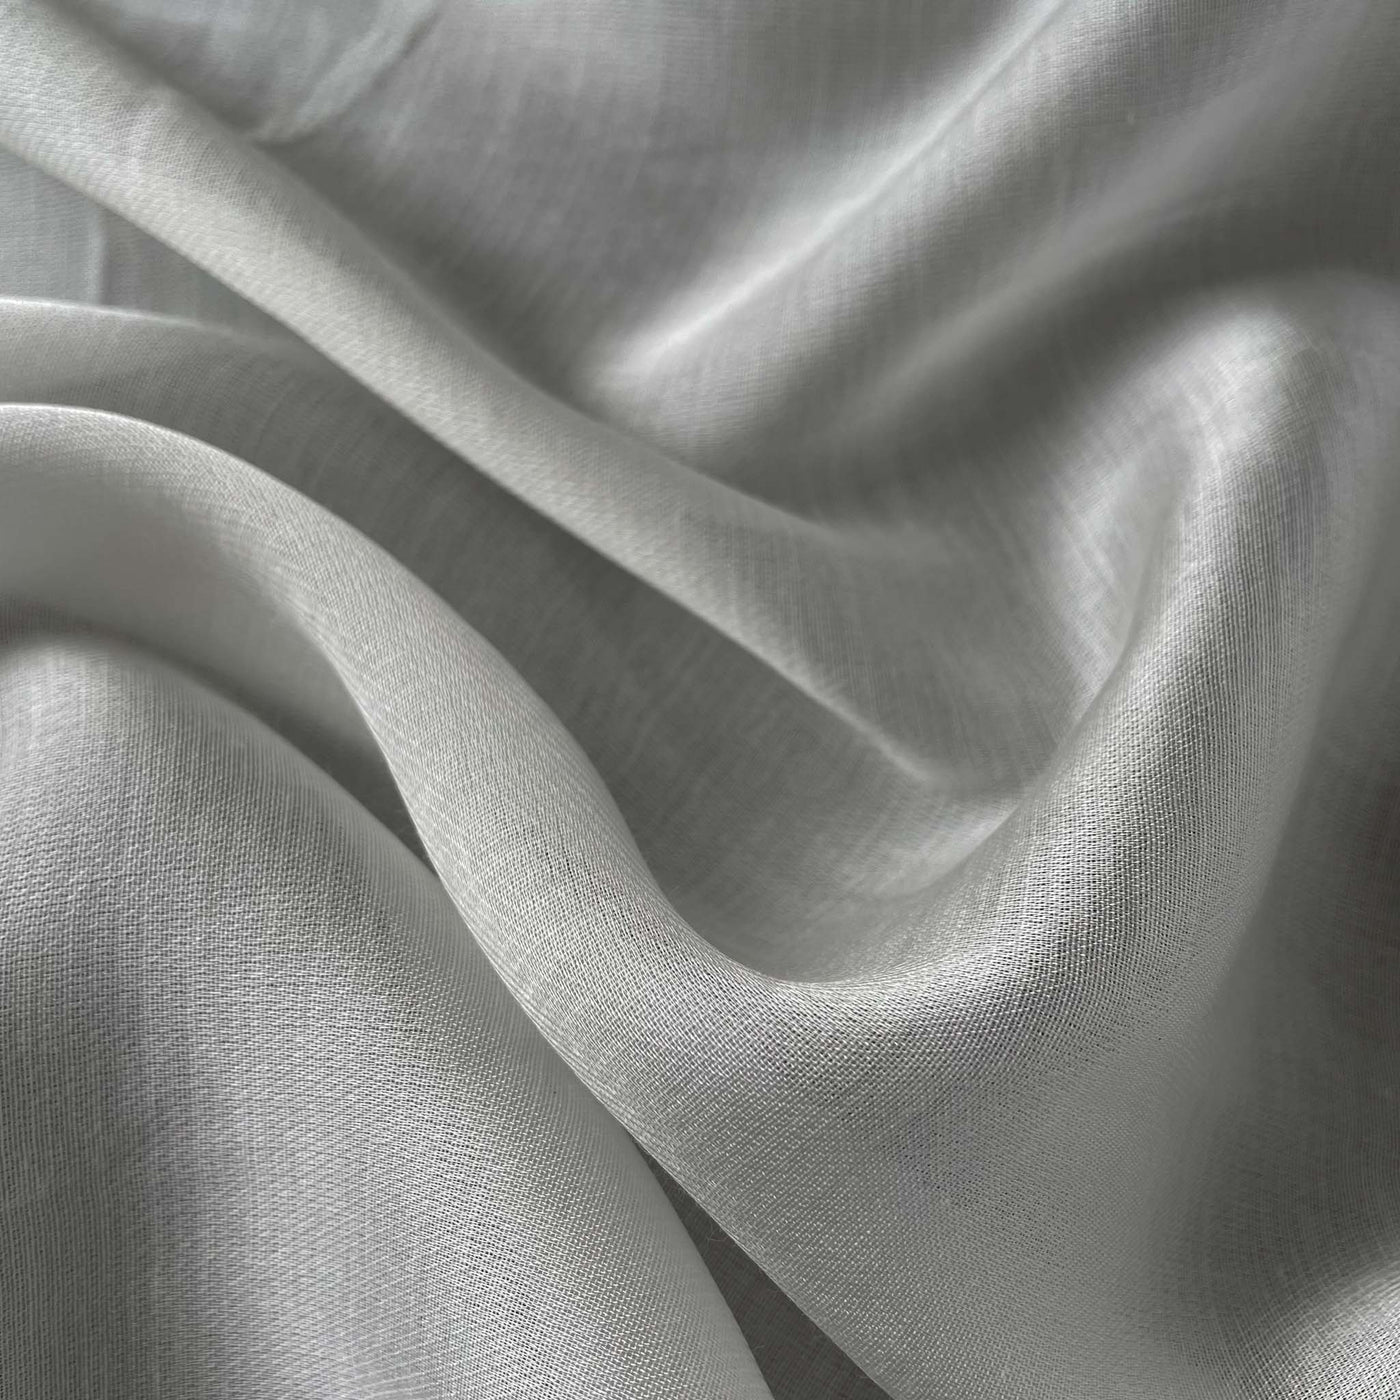 Dyeable Fabric Cut Piece (CUT PIECE) White Dyeable Pure Viscose Organza Satin Plain Fabric (Width 44 Inches)